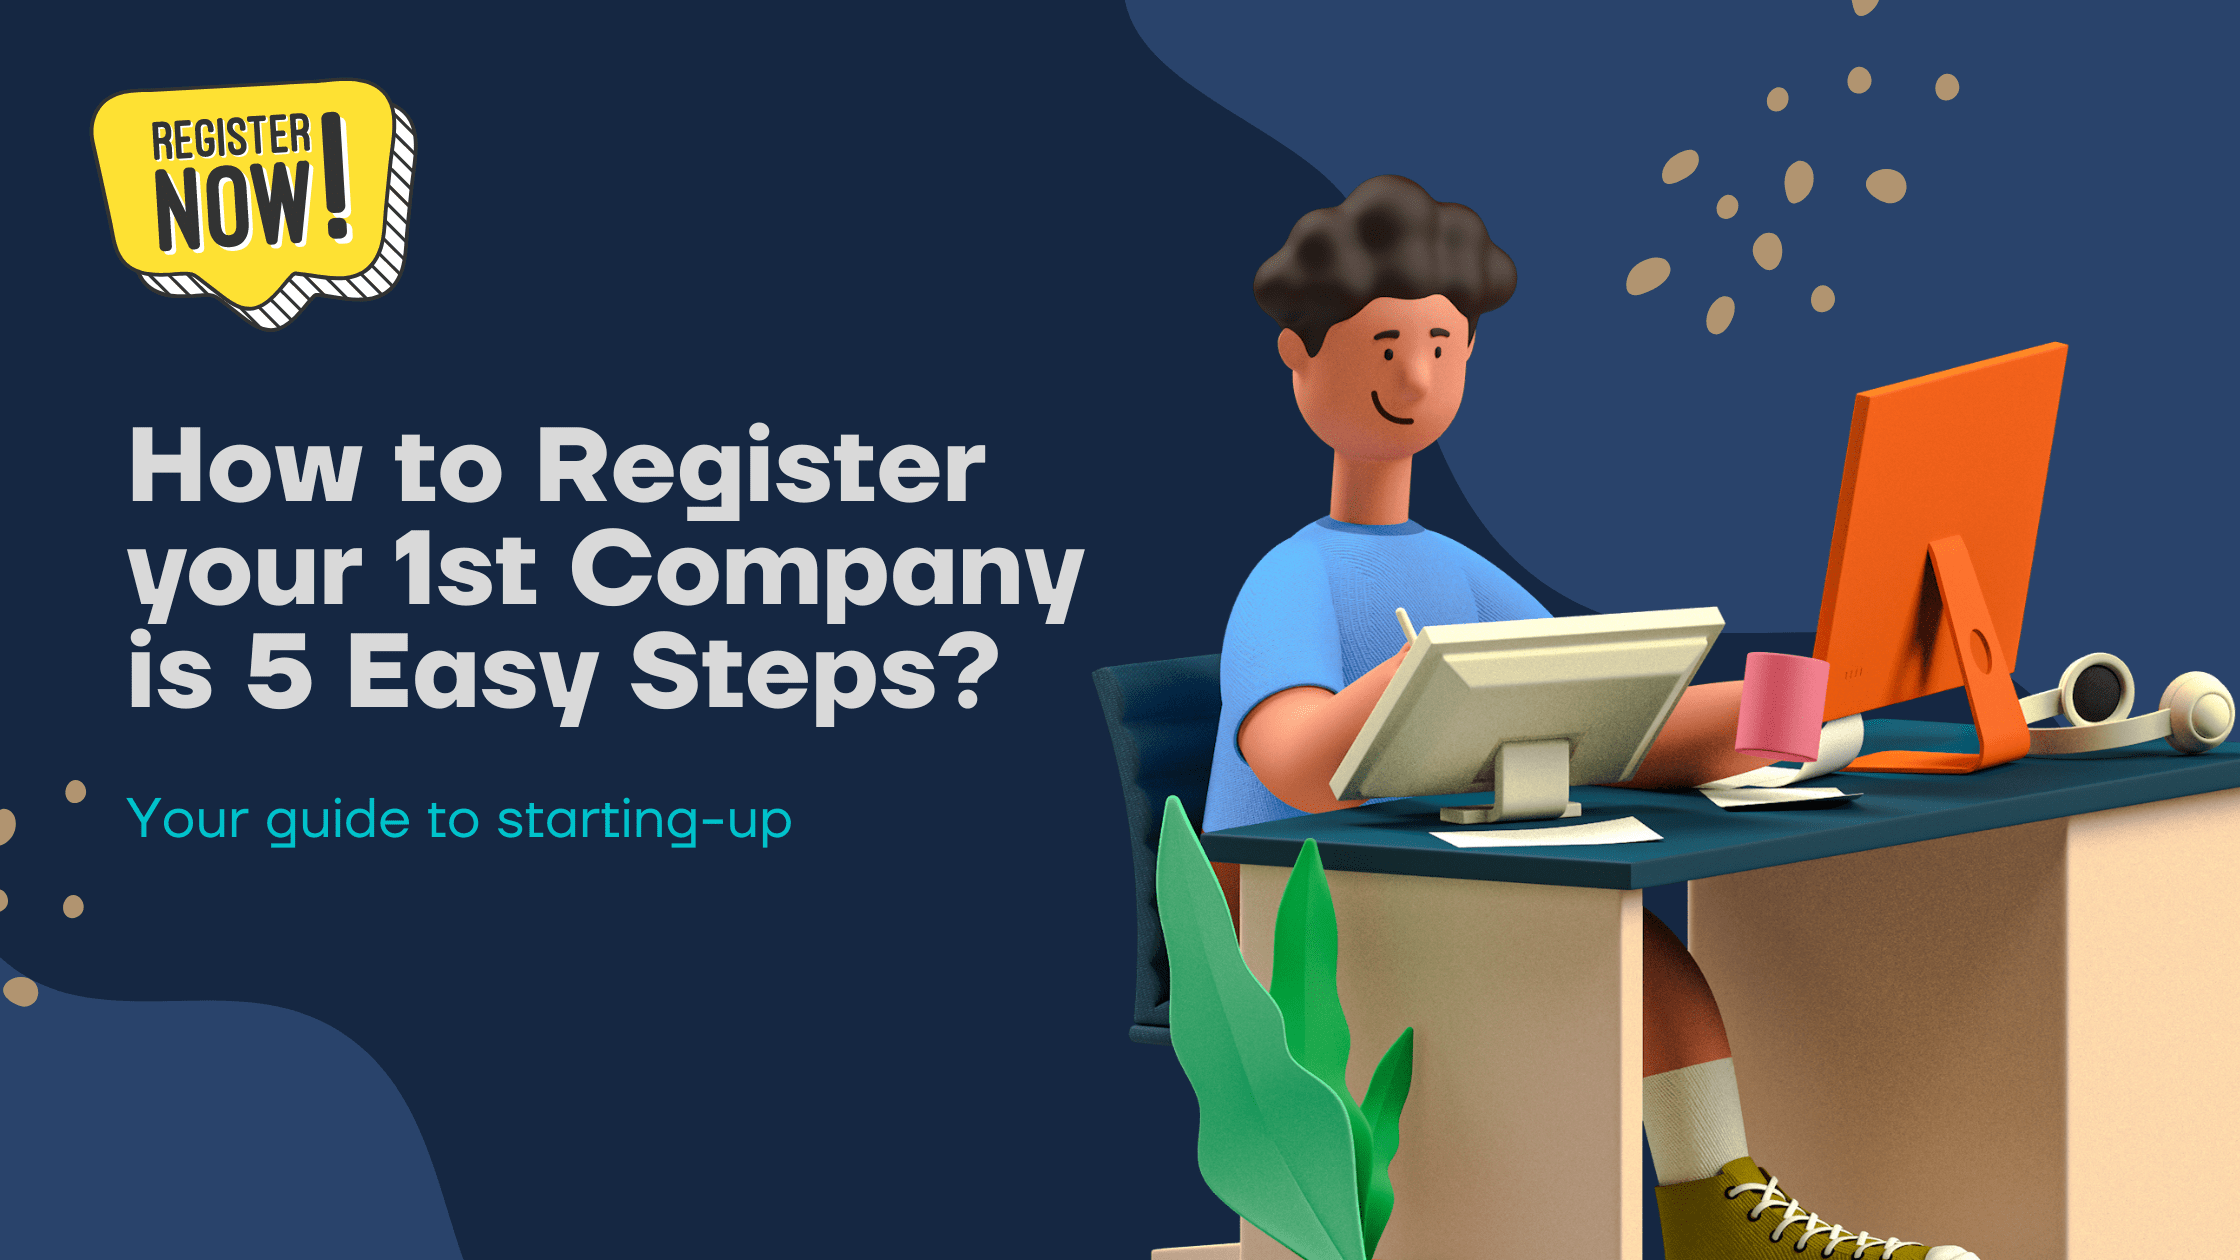 So you’ve decided to incorporate your first company but are lost in the maze of uncertainty and uncompiled knowledge? Go through this article to get a step-by-step guide to registering your first company.